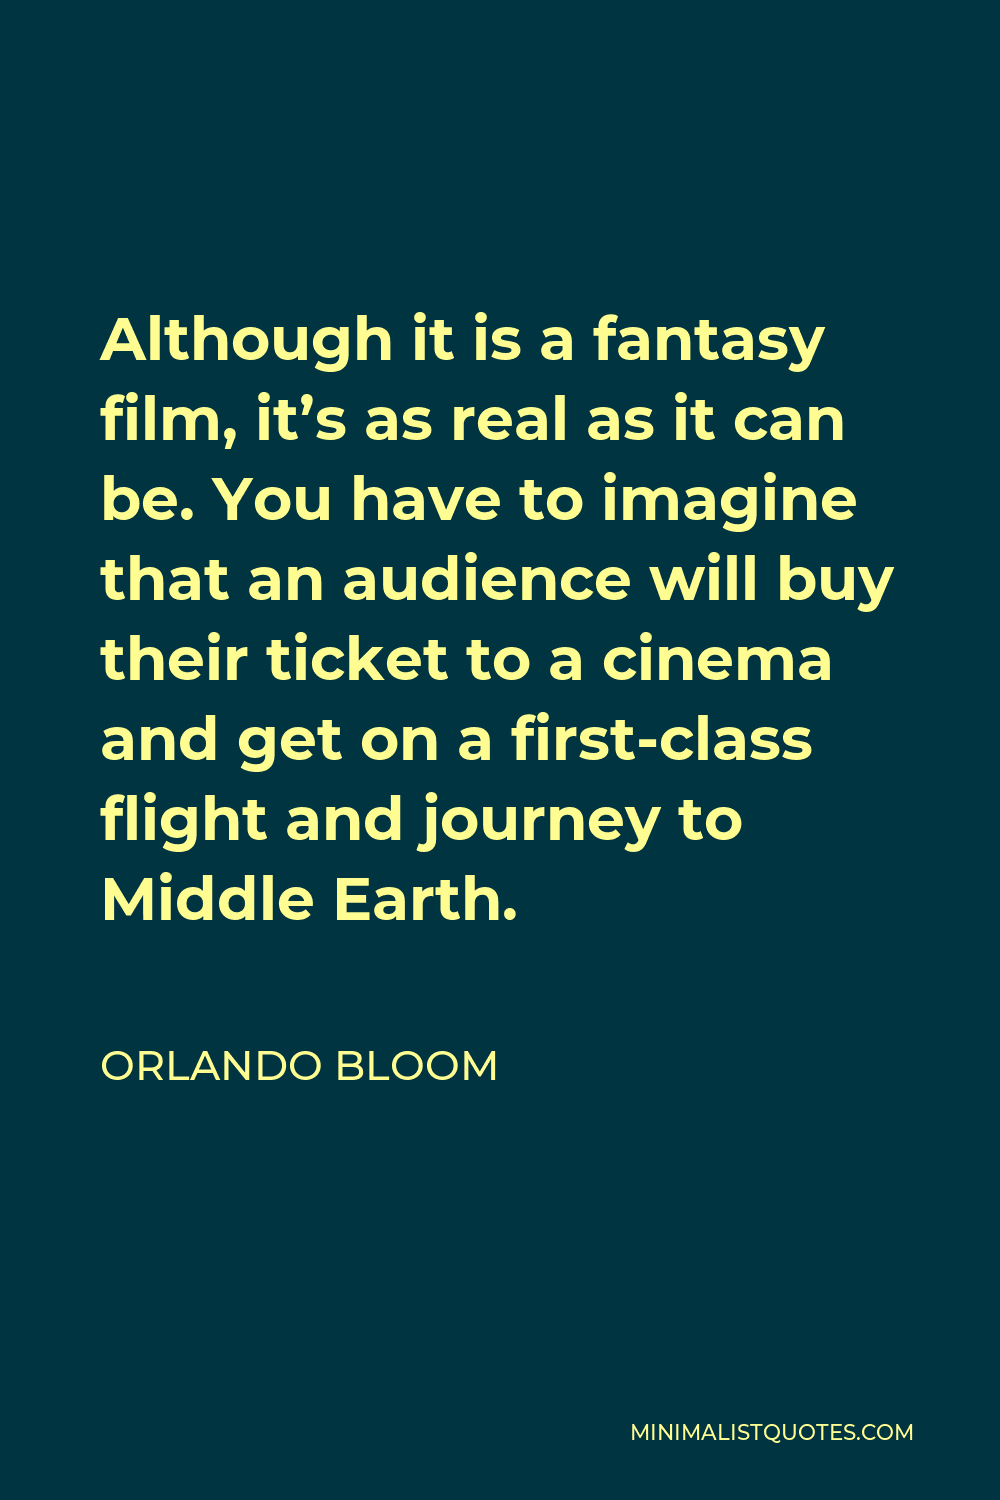 Orlando Bloom Quote - Although it is a fantasy film, it’s as real as it can be. You have to imagine that an audience will buy their ticket to a cinema and get on a first-class flight and journey to Middle Earth.